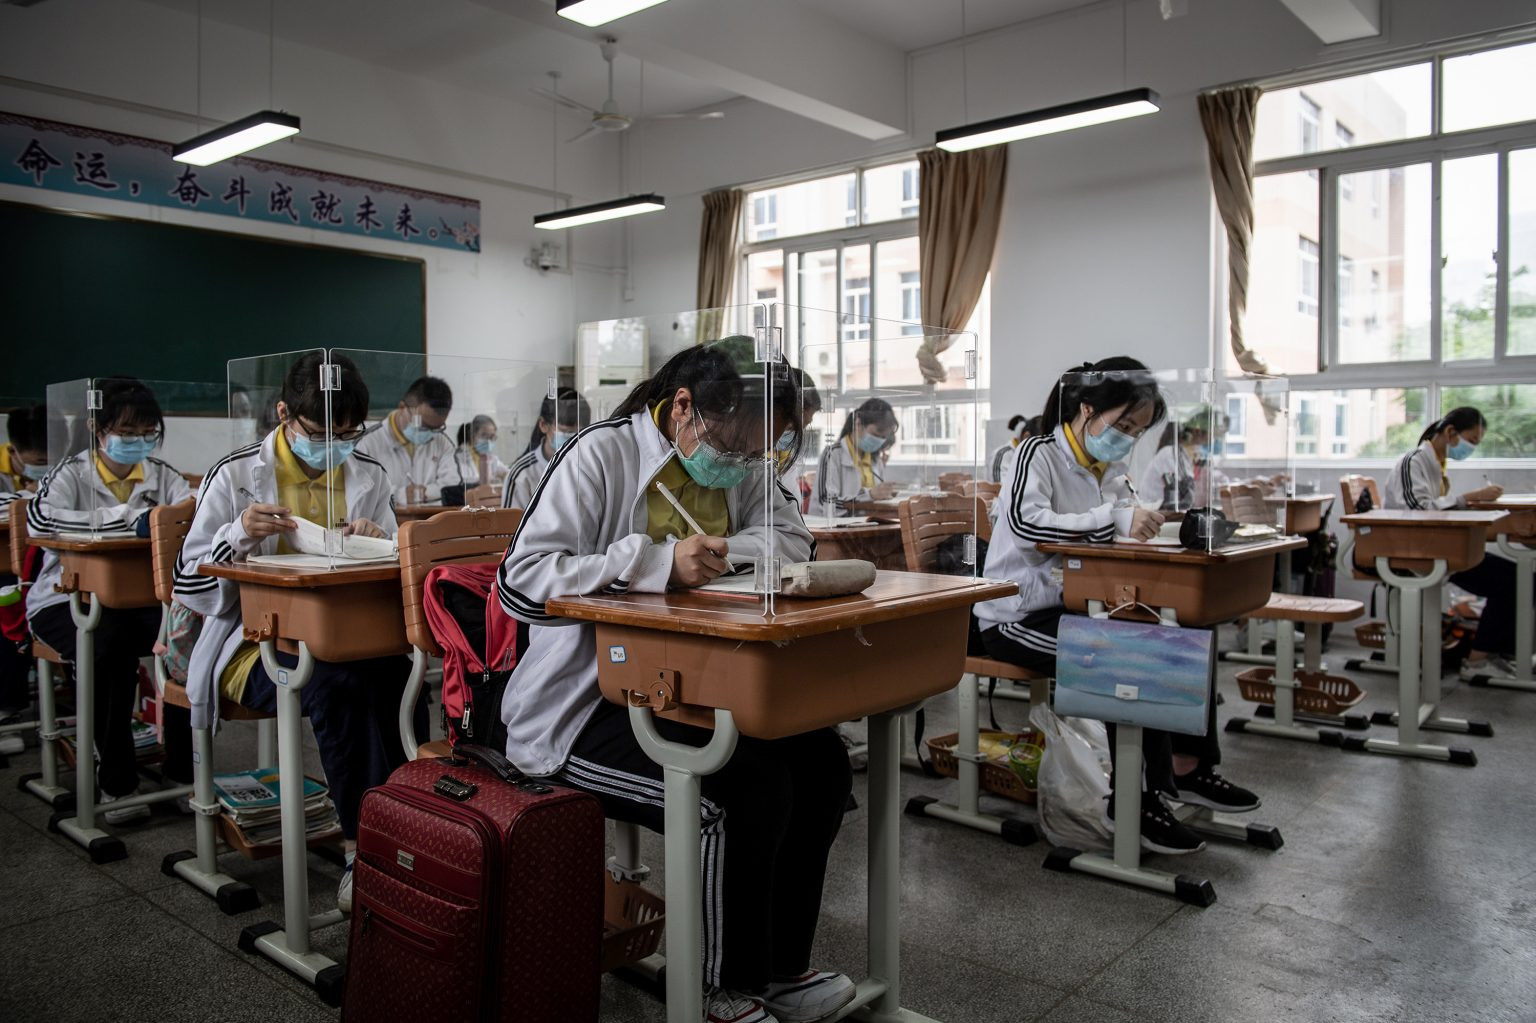 COVID-19: 121 Chinese schools reopen as over 50,000 students resume classes in Wuhan (Photos)